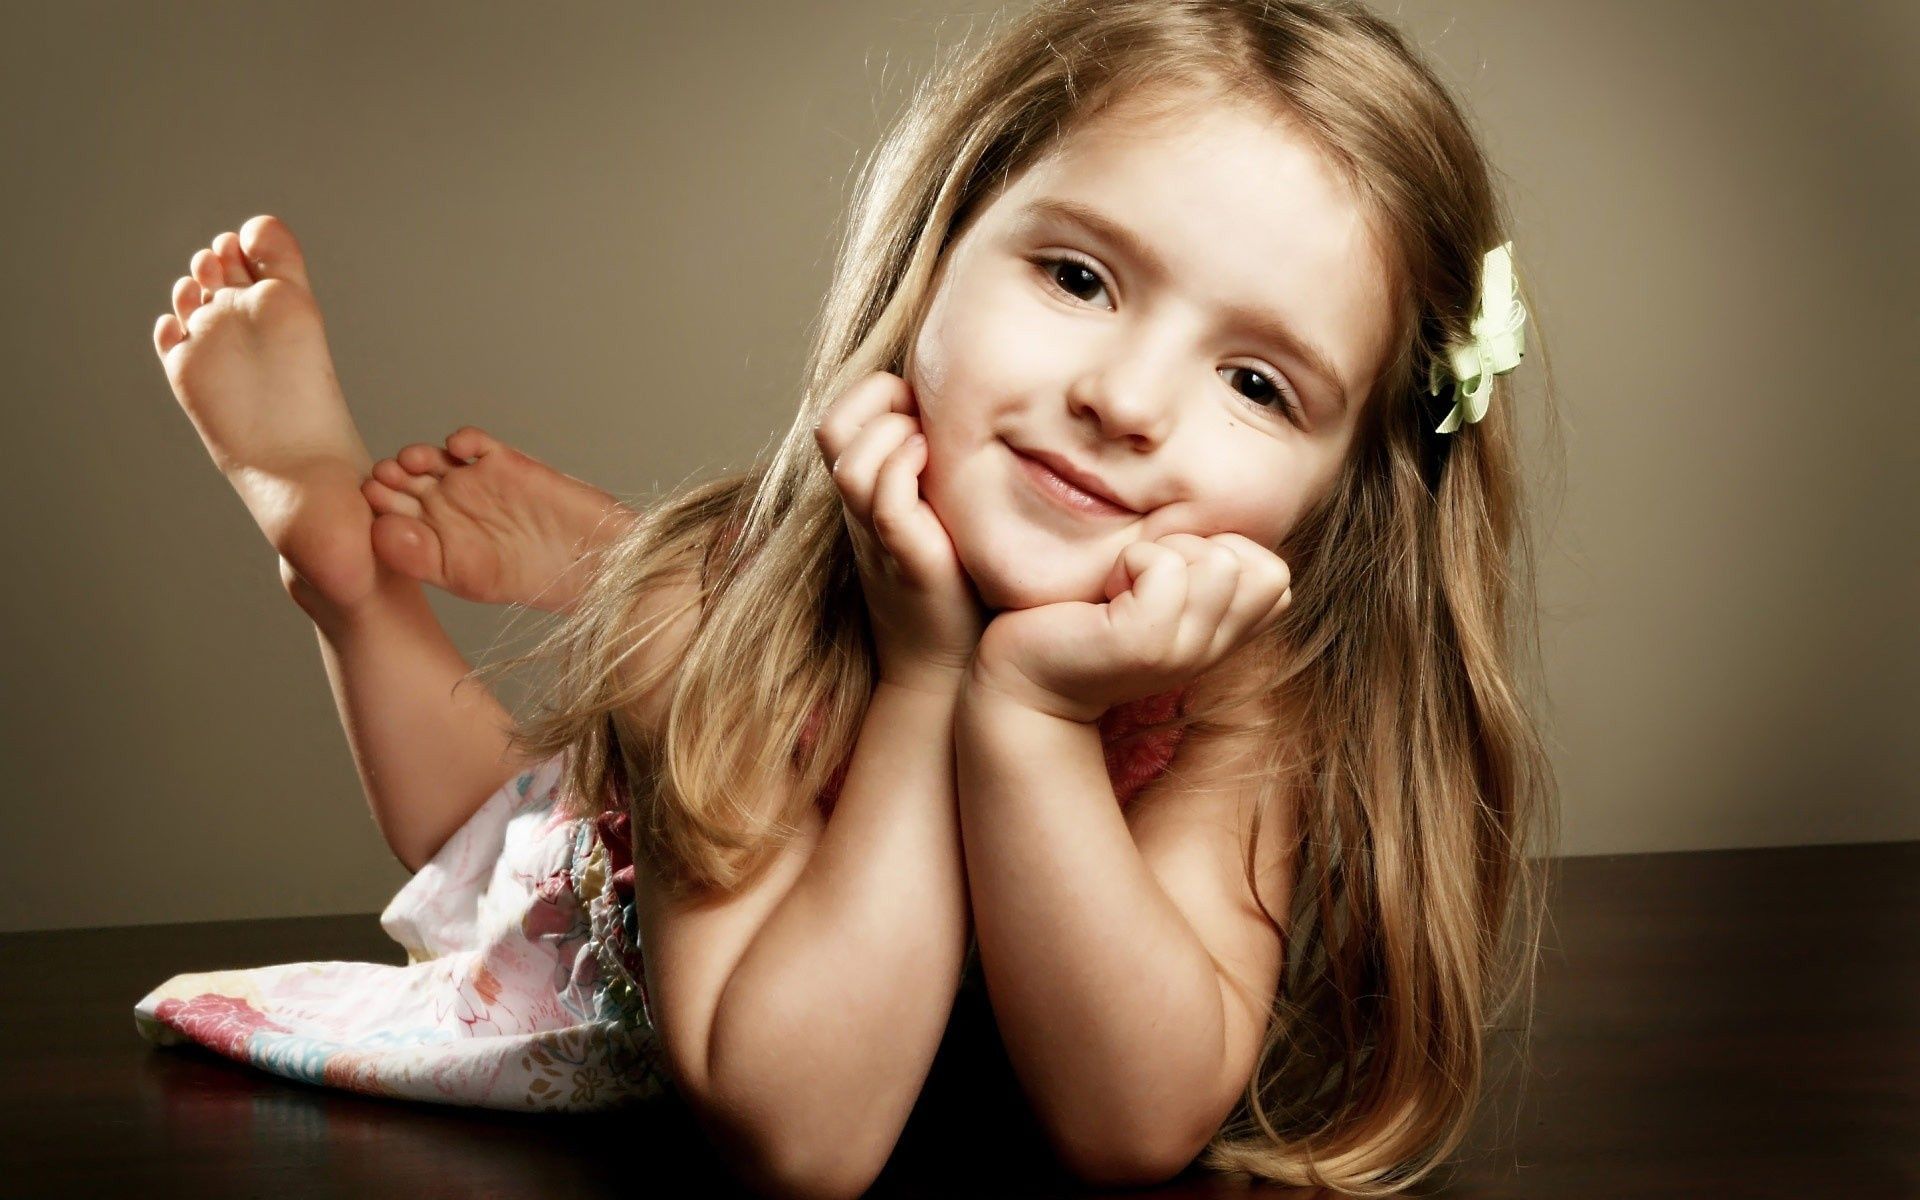 Cute Baby Wallpapers | Cute Babies Pictures | Cute Baby Girl ...